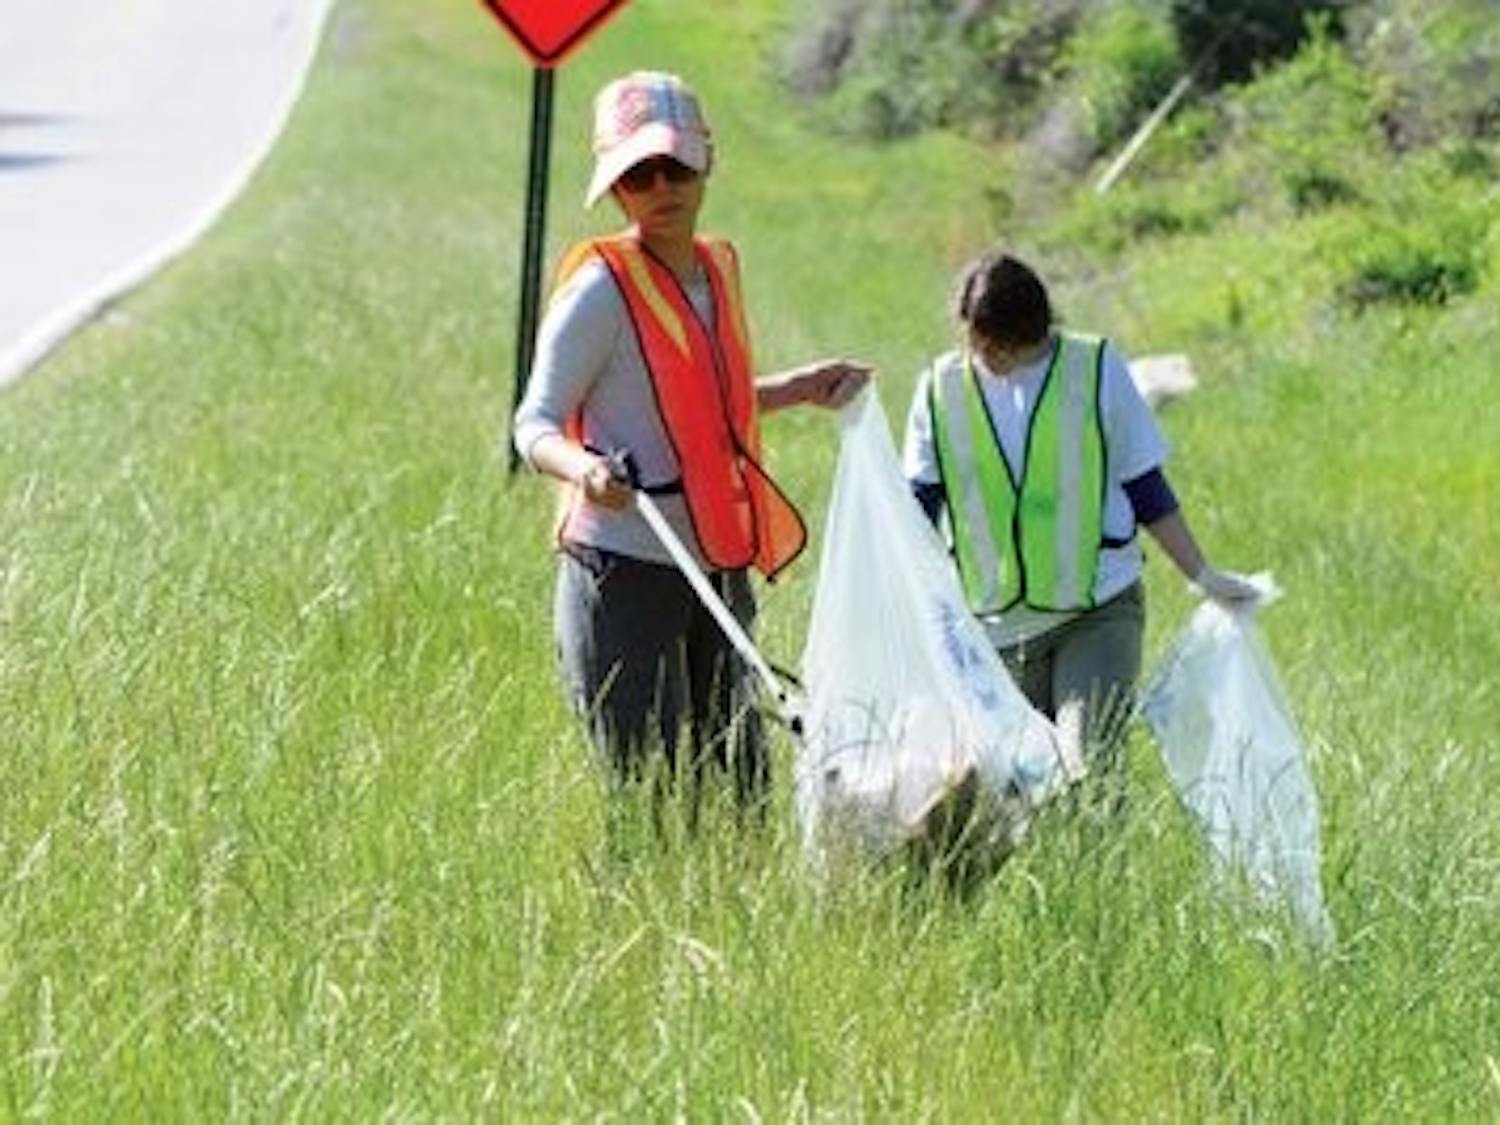 Bochaor Hu, graduate student in fisheries, and Savannah Warren, senior in fisheries, help pick up trash along the road Saturday. (Christen Harned / ASSISTANT PHOTO EDITOR)